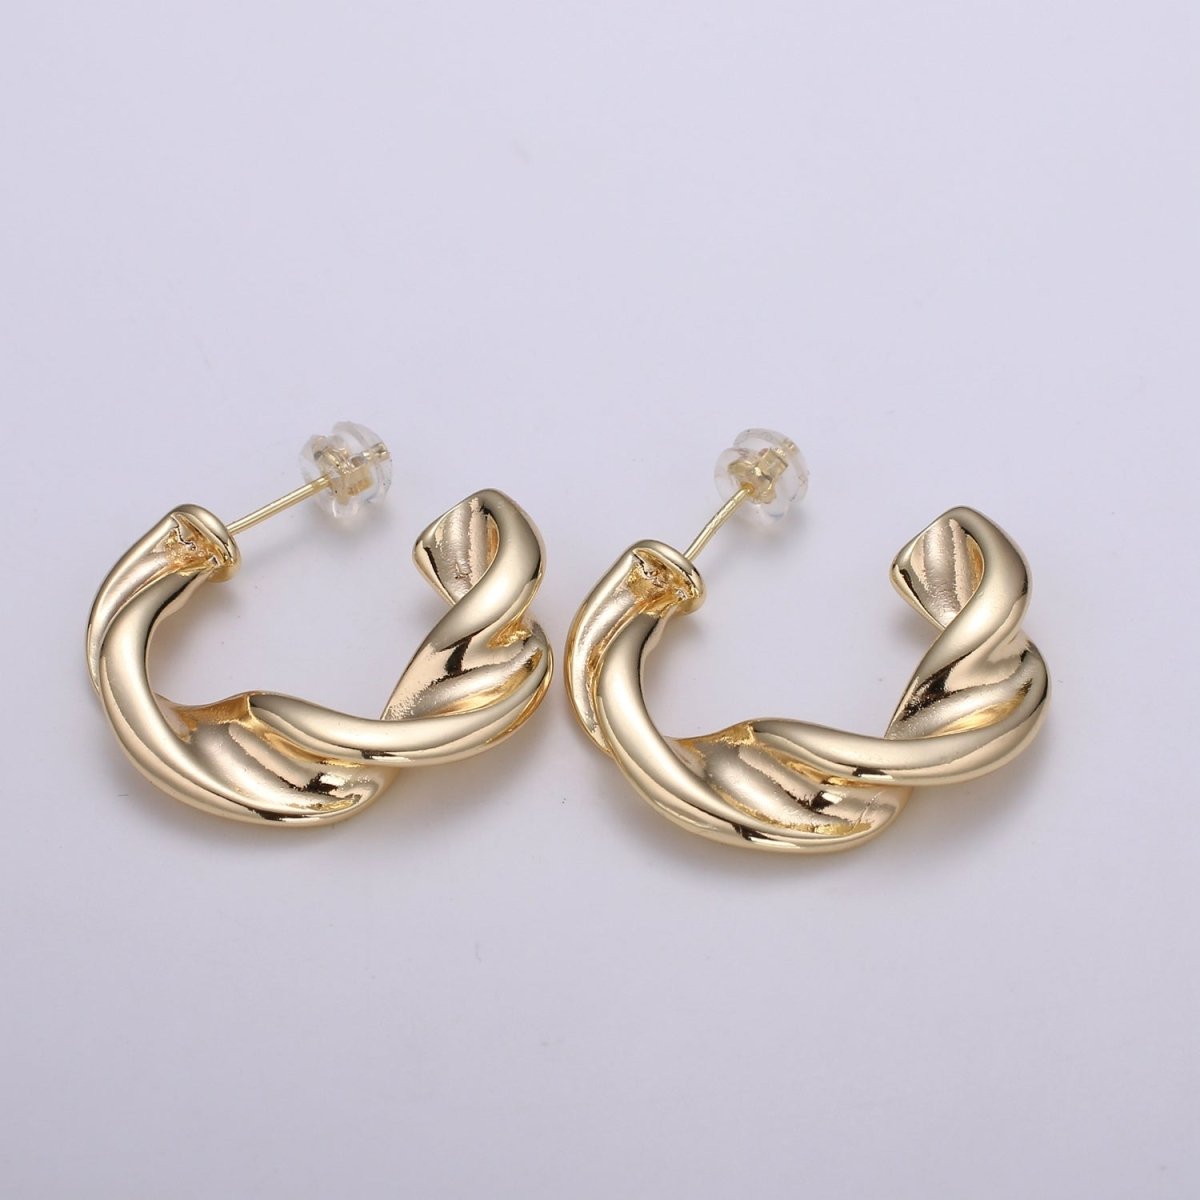 Twisted Design 18K Gold Stud Earring, Rose Gold Wavy Earring for DIY Earring Craft Supply Jewelry Making Q-459 - DLUXCA